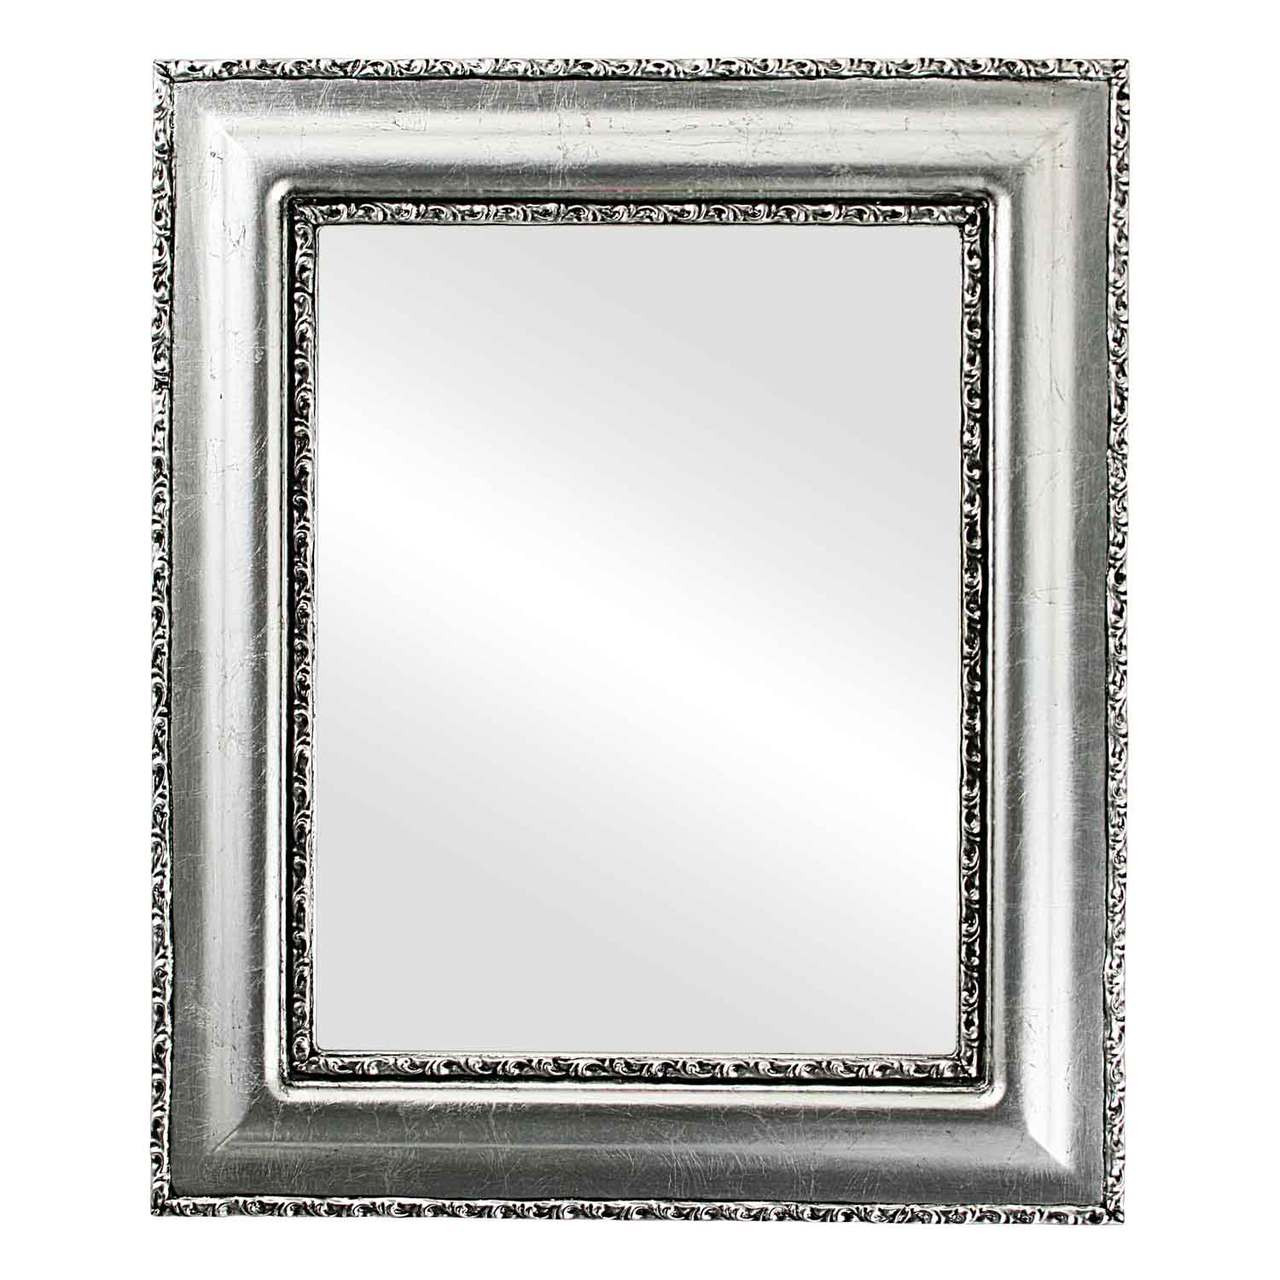 Rectangle Framed Mirror #452 Somerset Silver Leaf with Black Antique Finish - 1 - Wood - Silver / Black - Victorian Frame Company